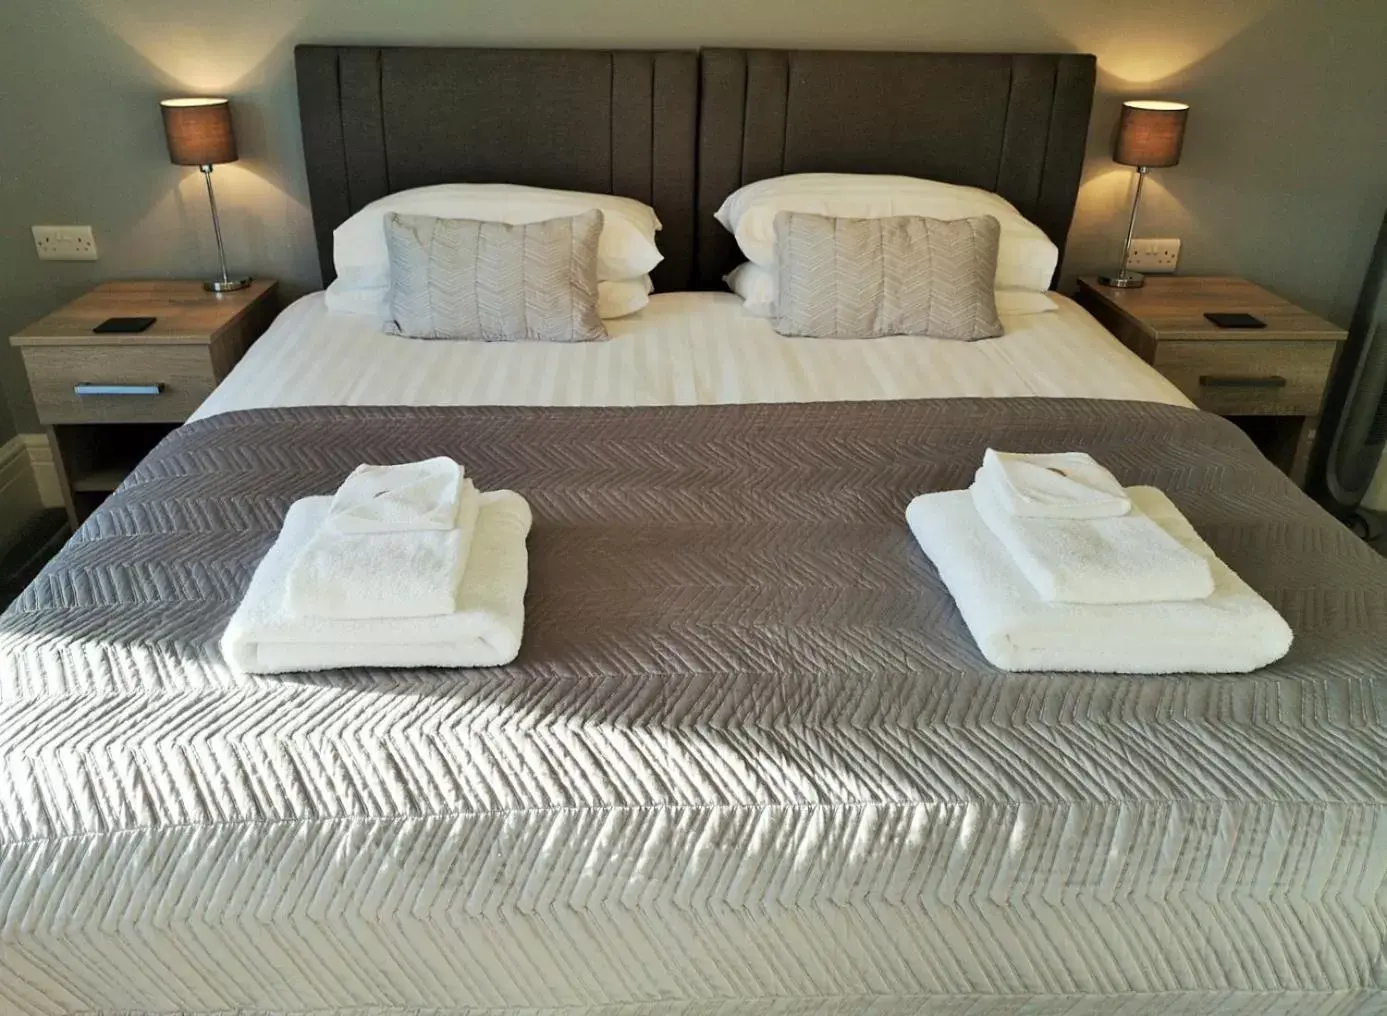 Bed in Aberconwy House B&B